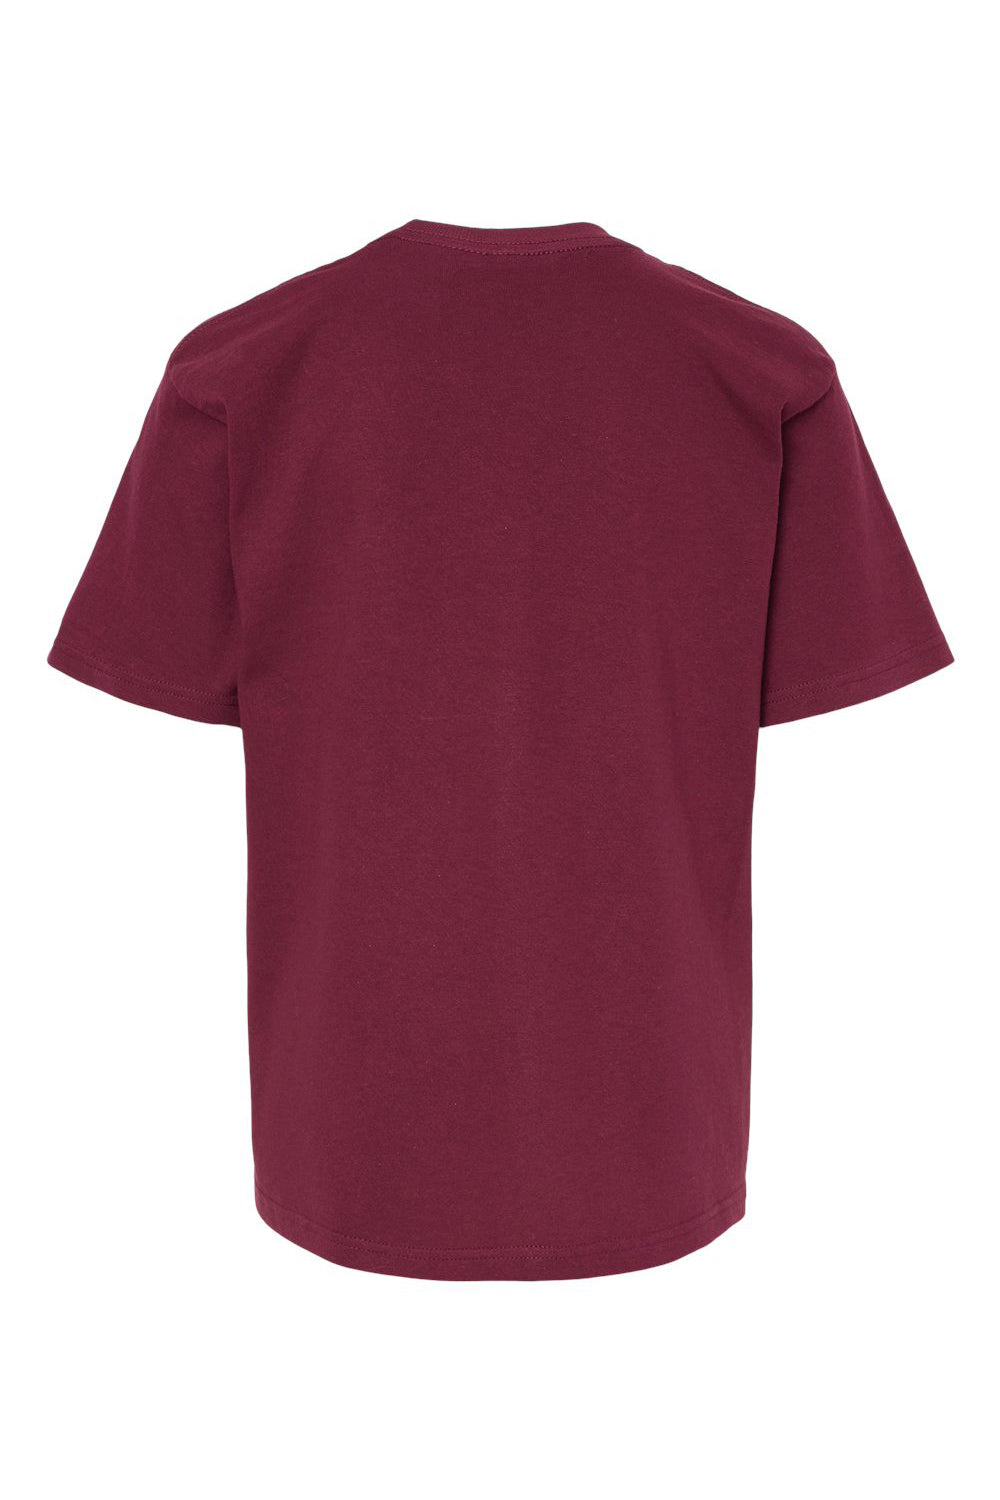 M&O 4850 Youth Gold Soft Touch Short Sleeve Crewneck T-Shirt Maroon Flat Back